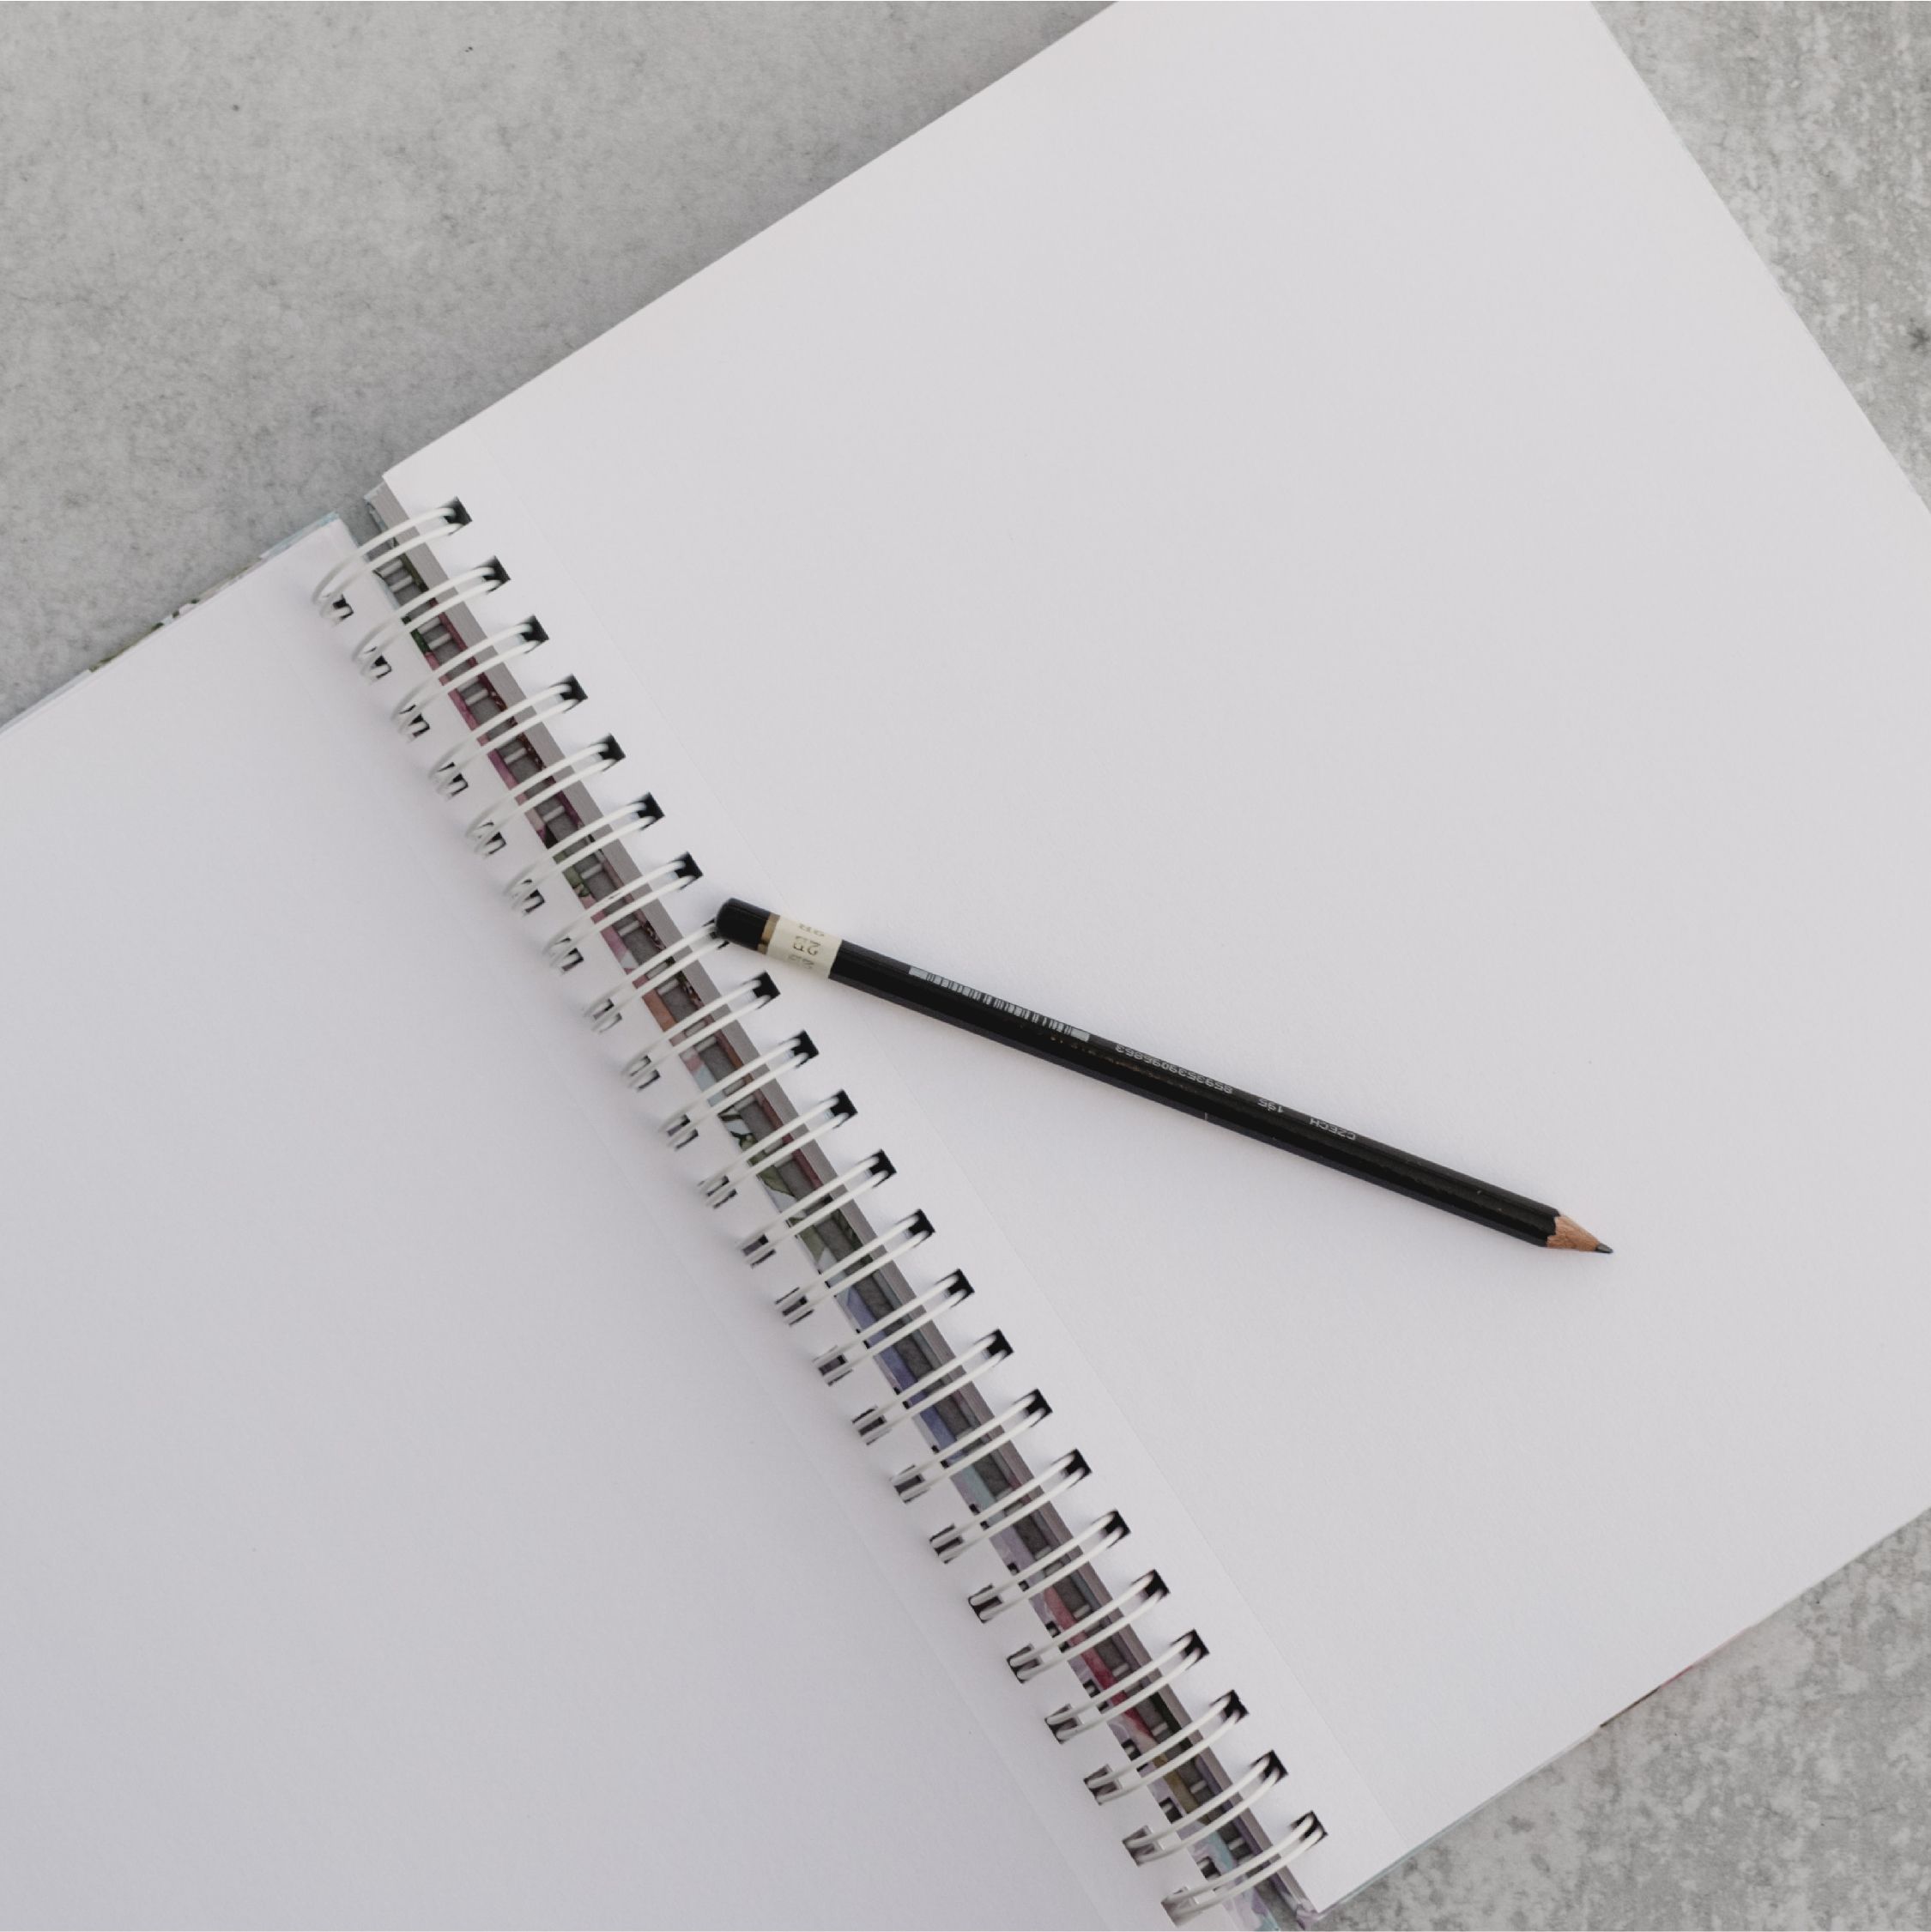 Pen and paper for copywriting